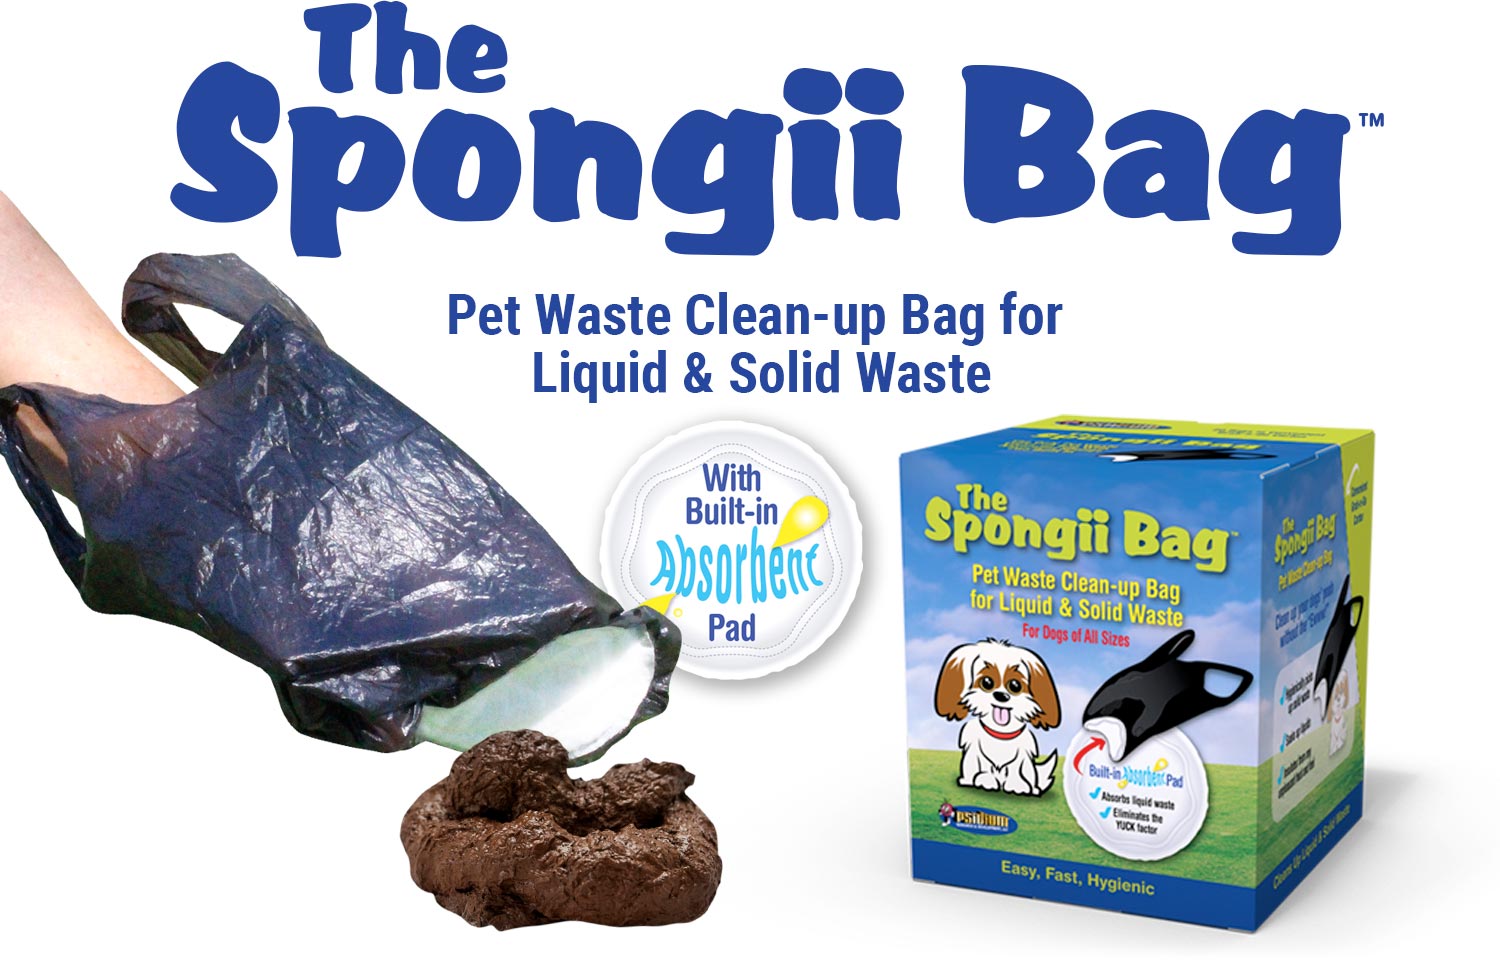 pet waste clean-up bag for liquid and solid waste